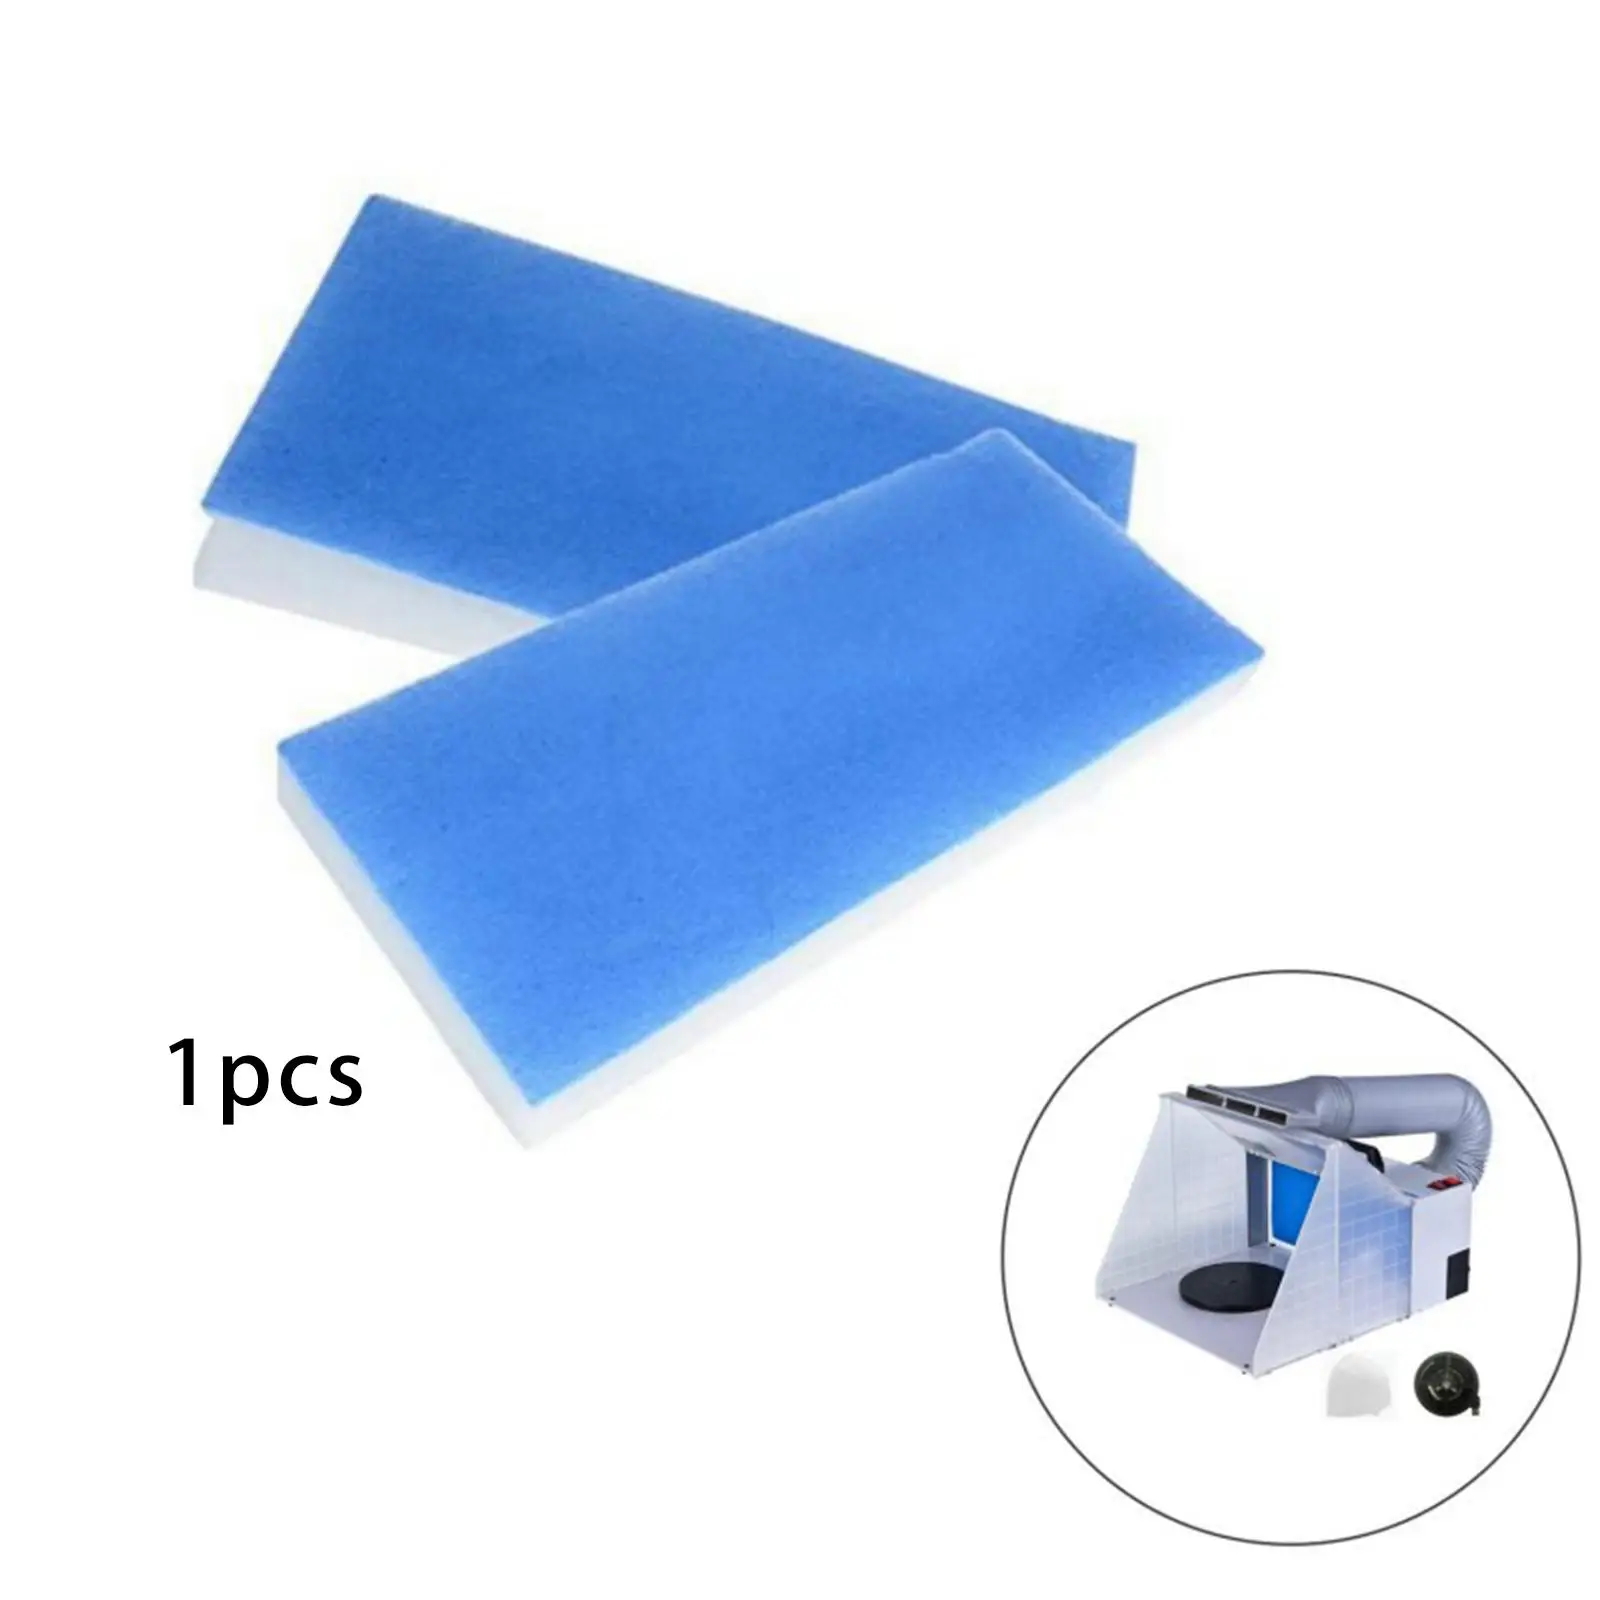 1x Spray Booth Filter Replaceable High Quality Material Practical Tool Durable Easy to Clean Filter Pad for Master, Paasche